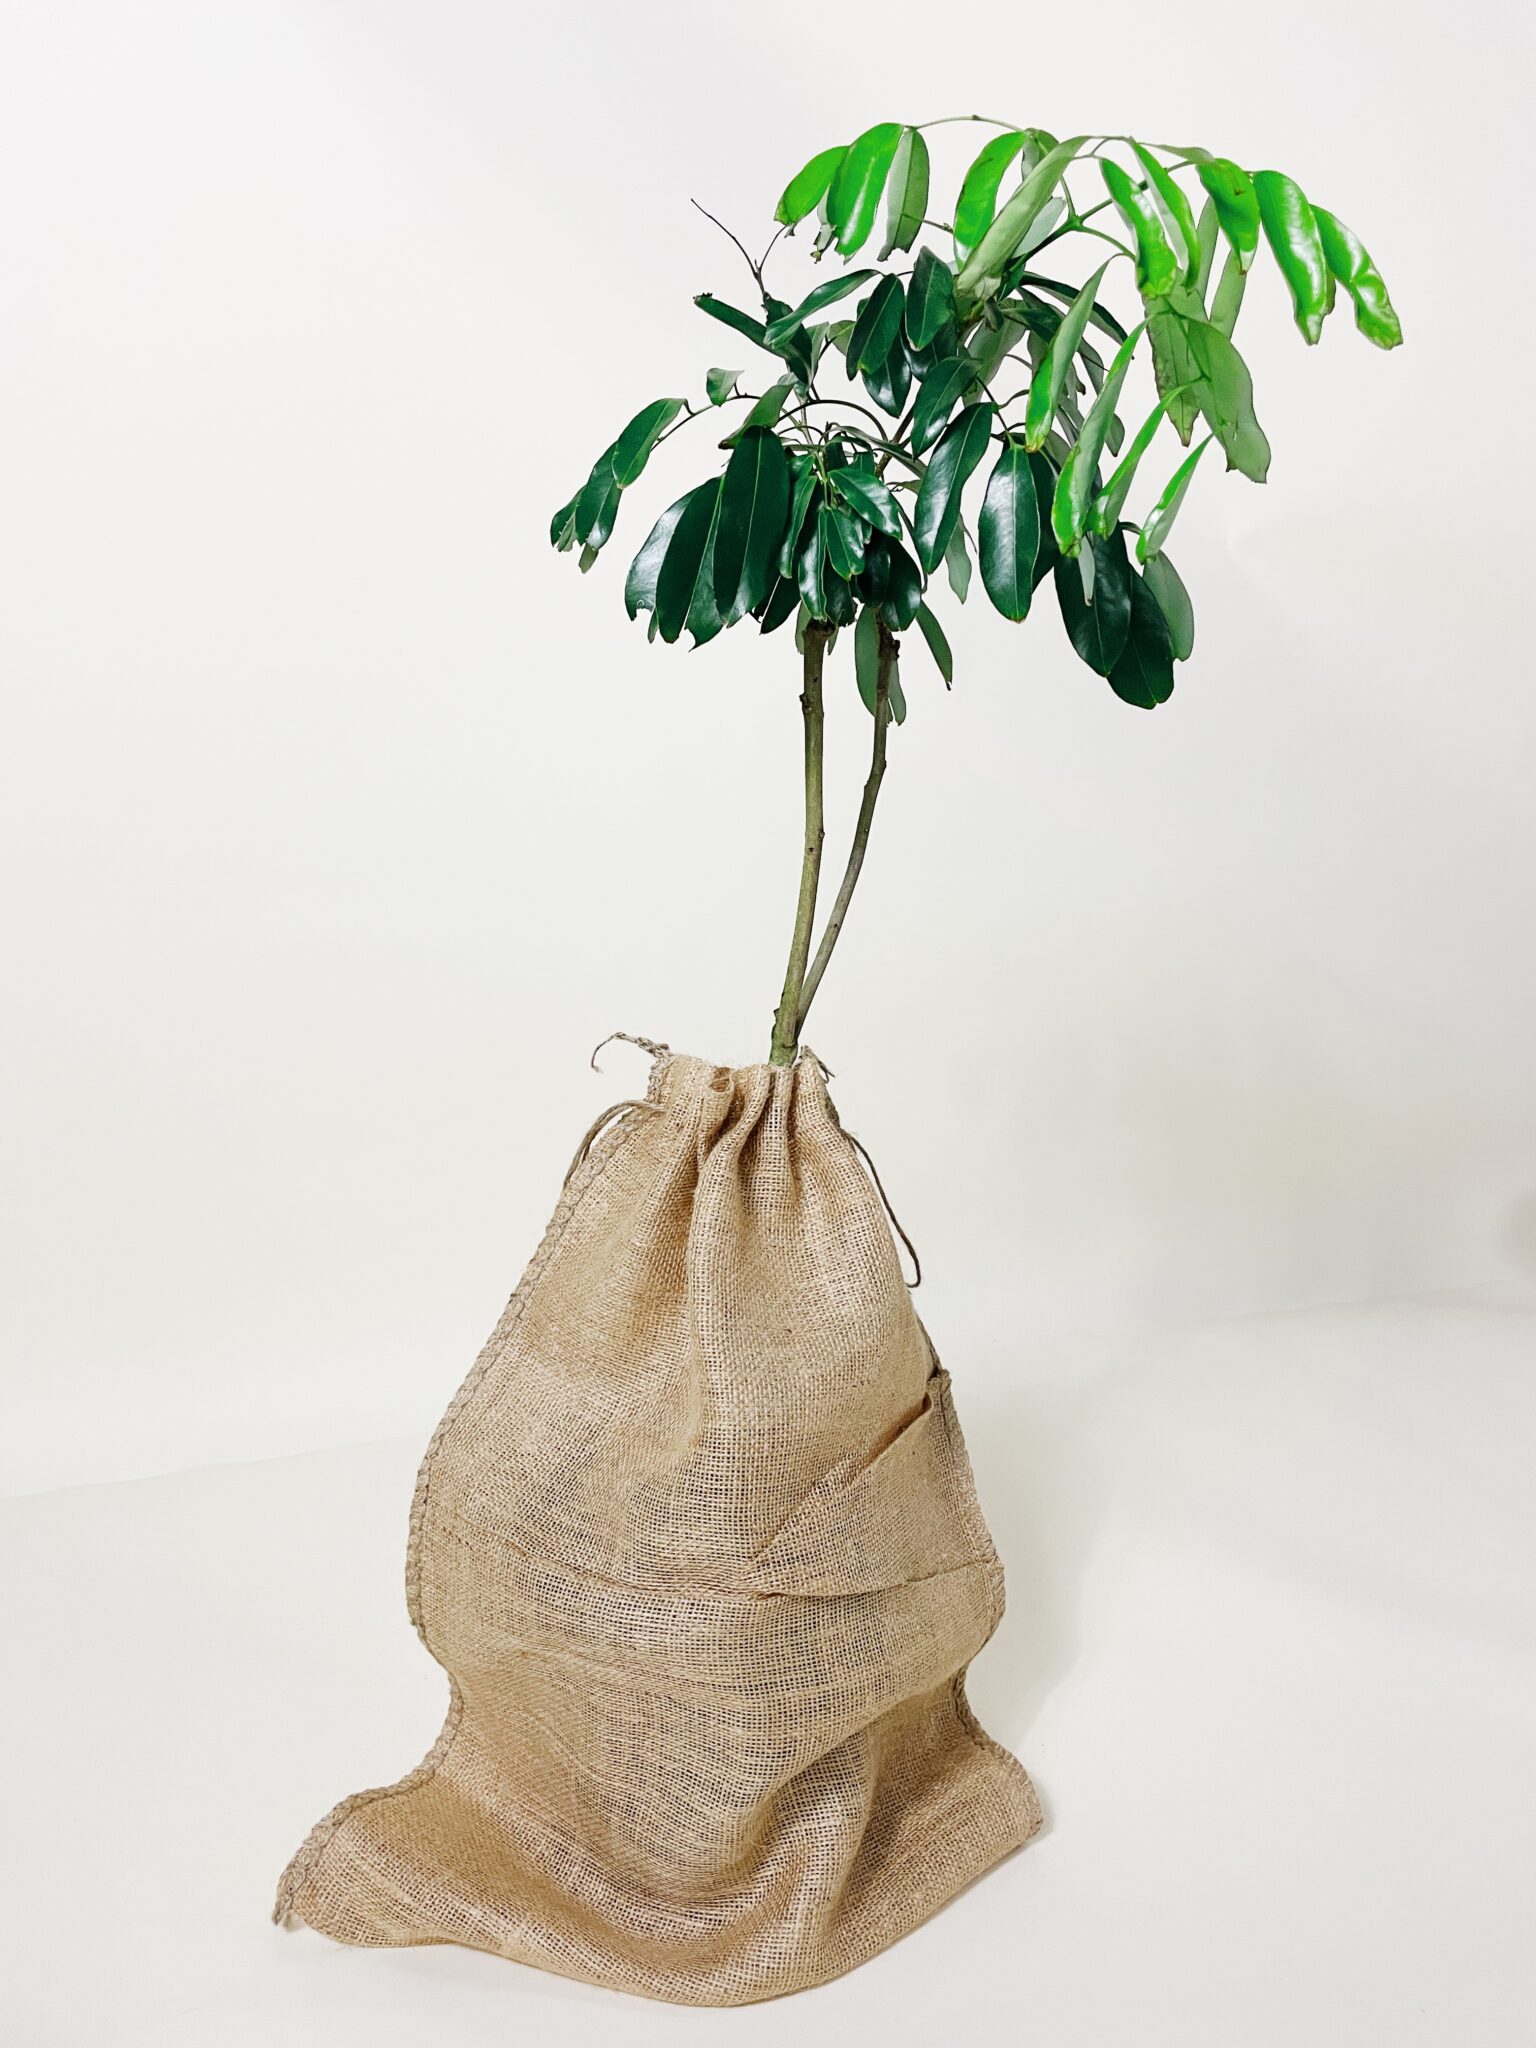 Image of Brewster Lychee Tree (Height: 1 TO 2 FT Burlap Sack: No)